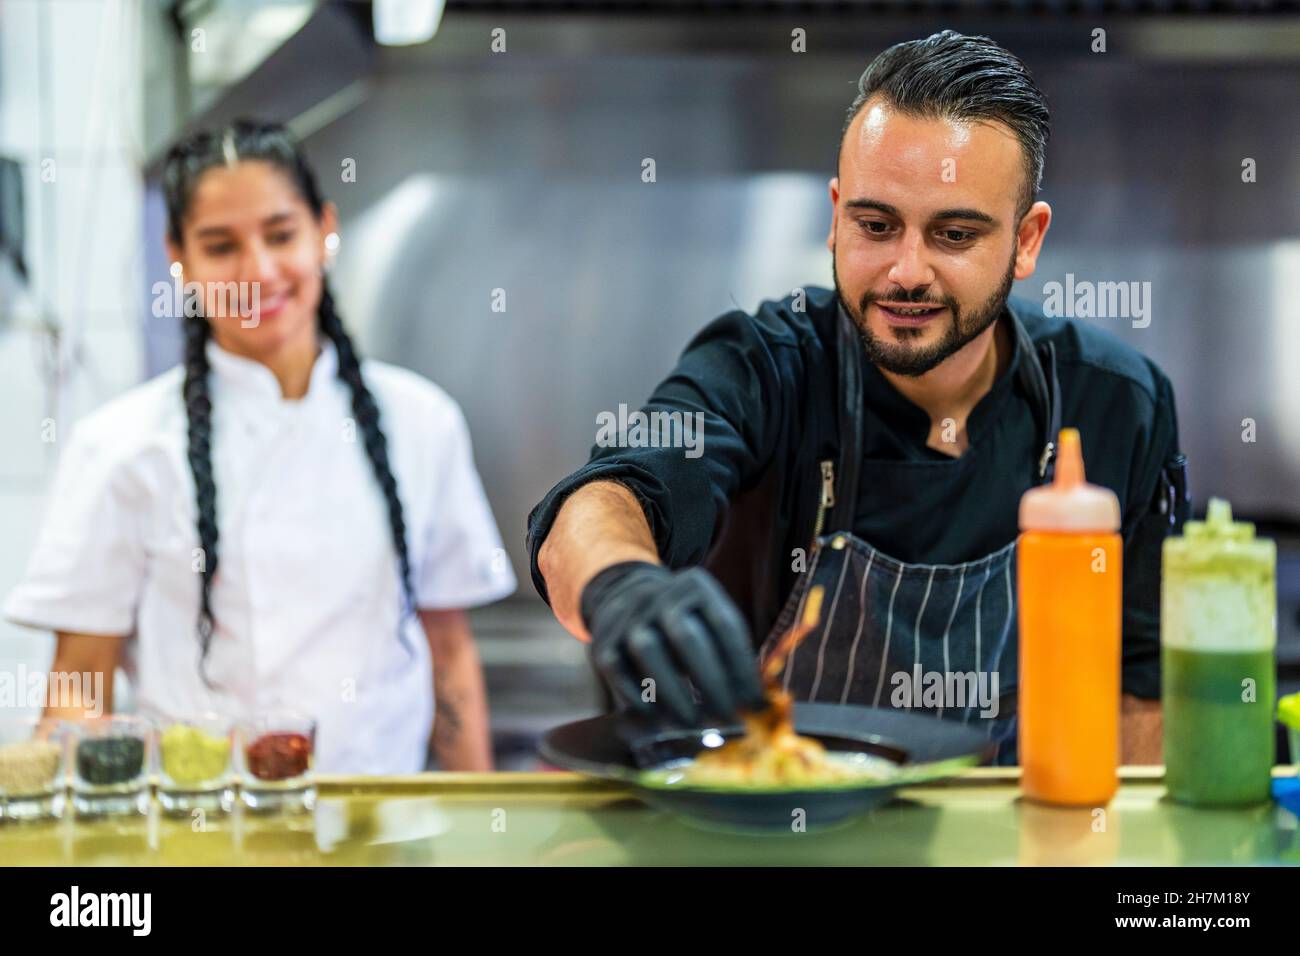 Chef decorating food with trainee in background Stock Photo